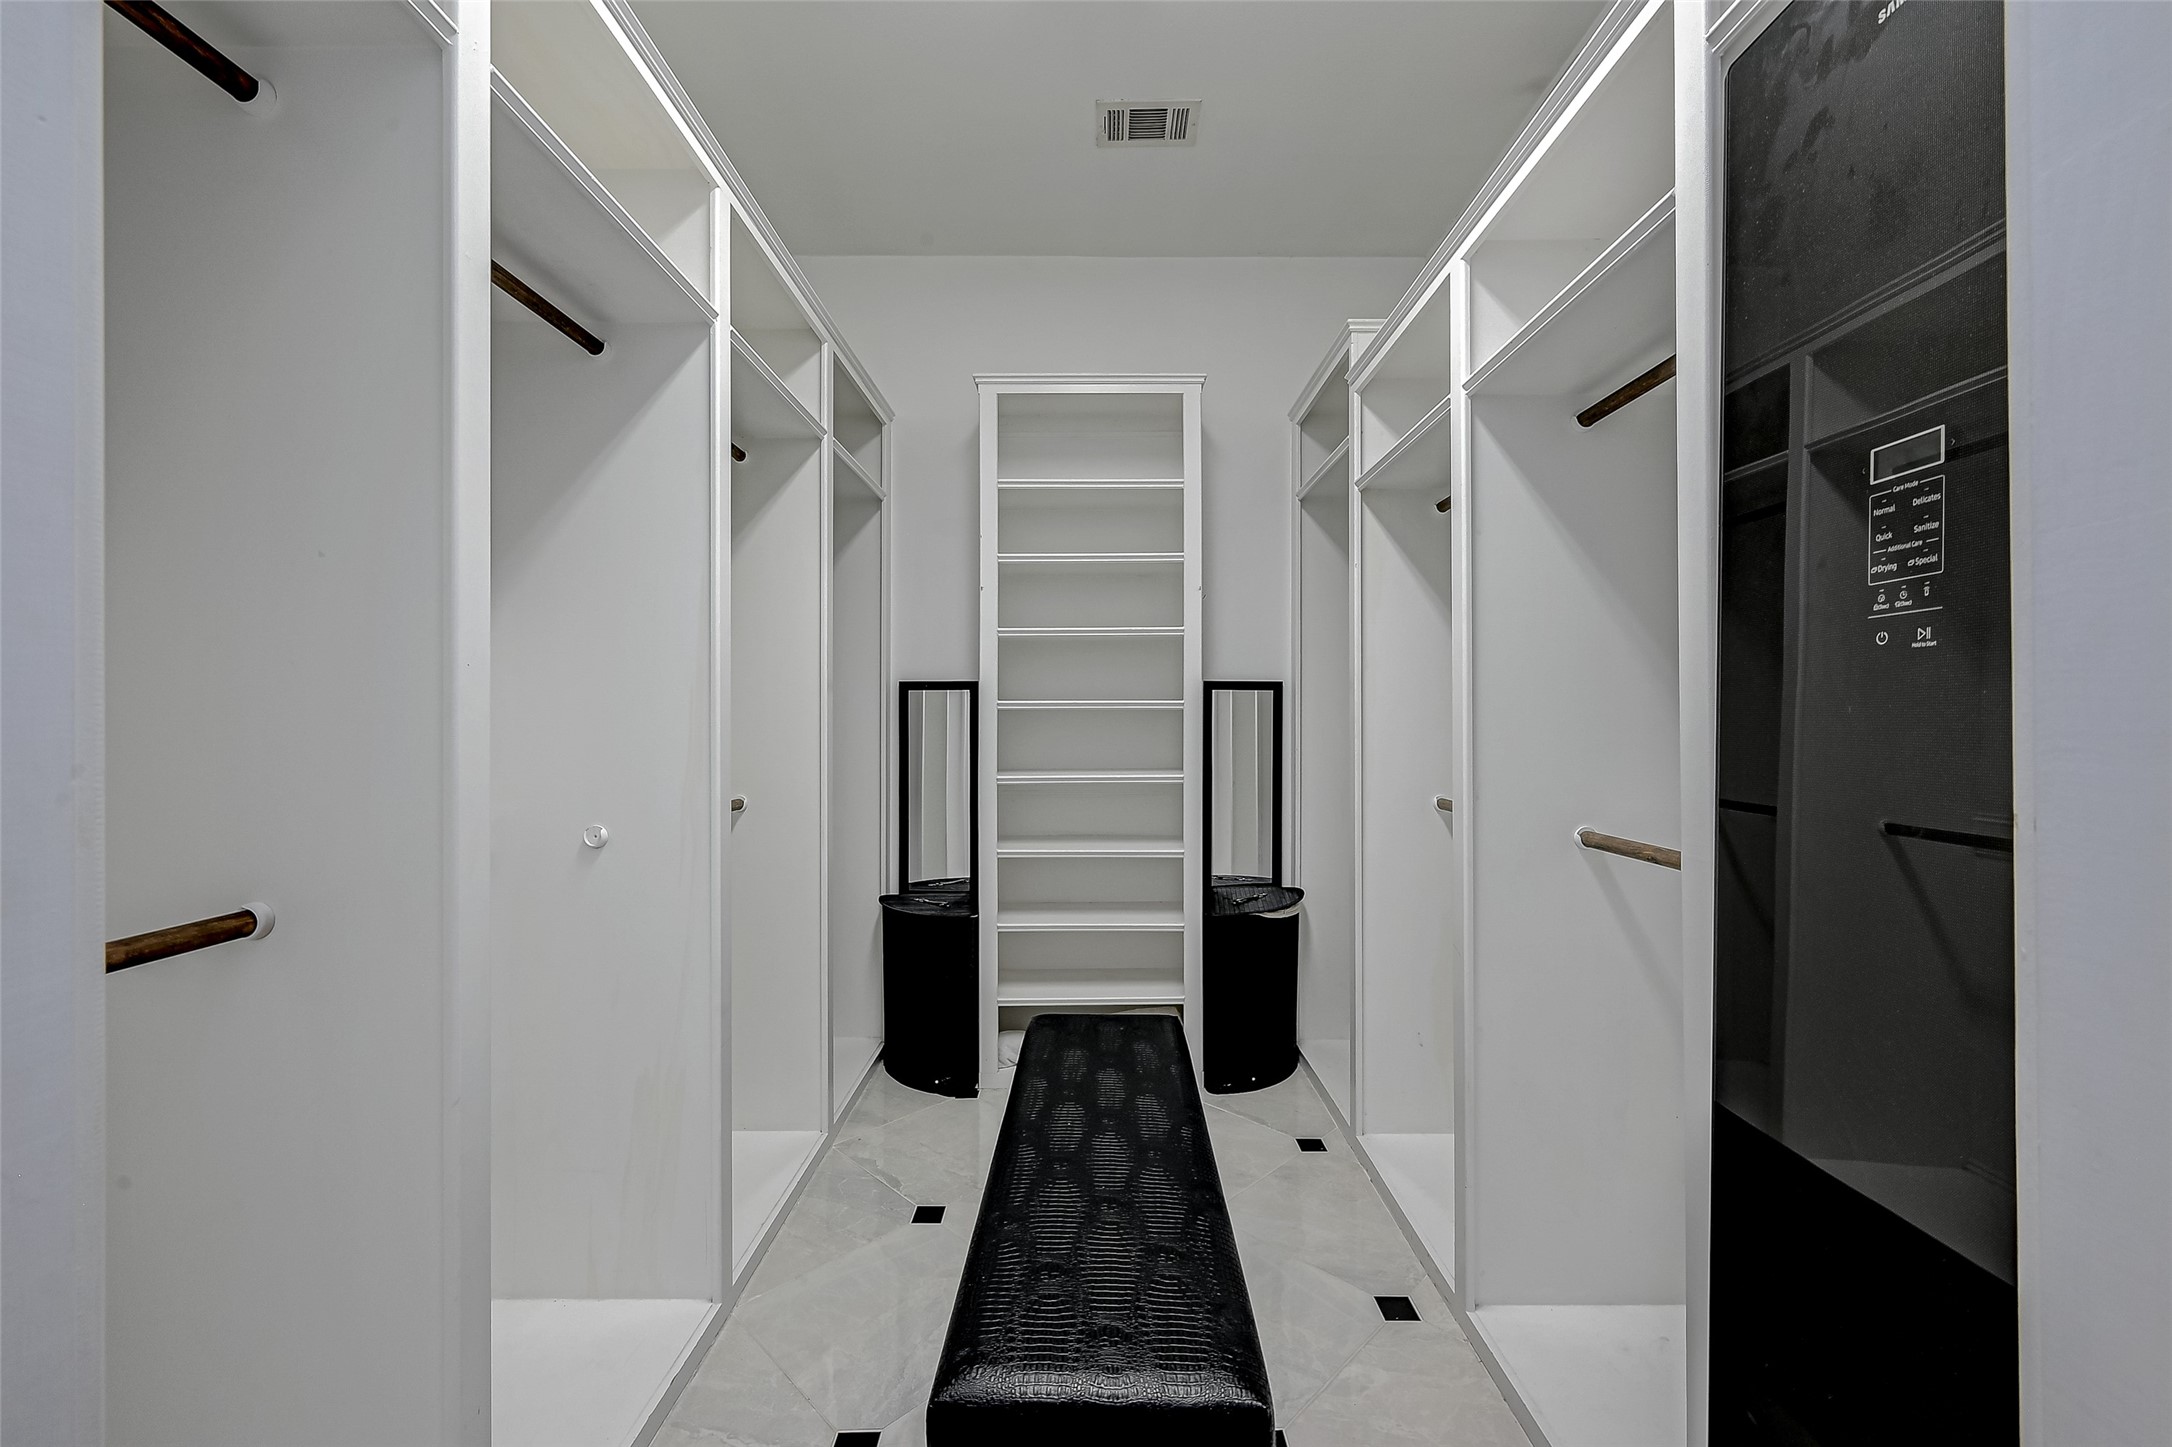 Step into the realm of organizational luxury within this dream walk-in closet, where a carefully crafted space features multiple hanging rods that elegantly display your wardrobe. Built-in shelving showcases accessories and shoes, turning them into pieces of art while maintaining easy access.